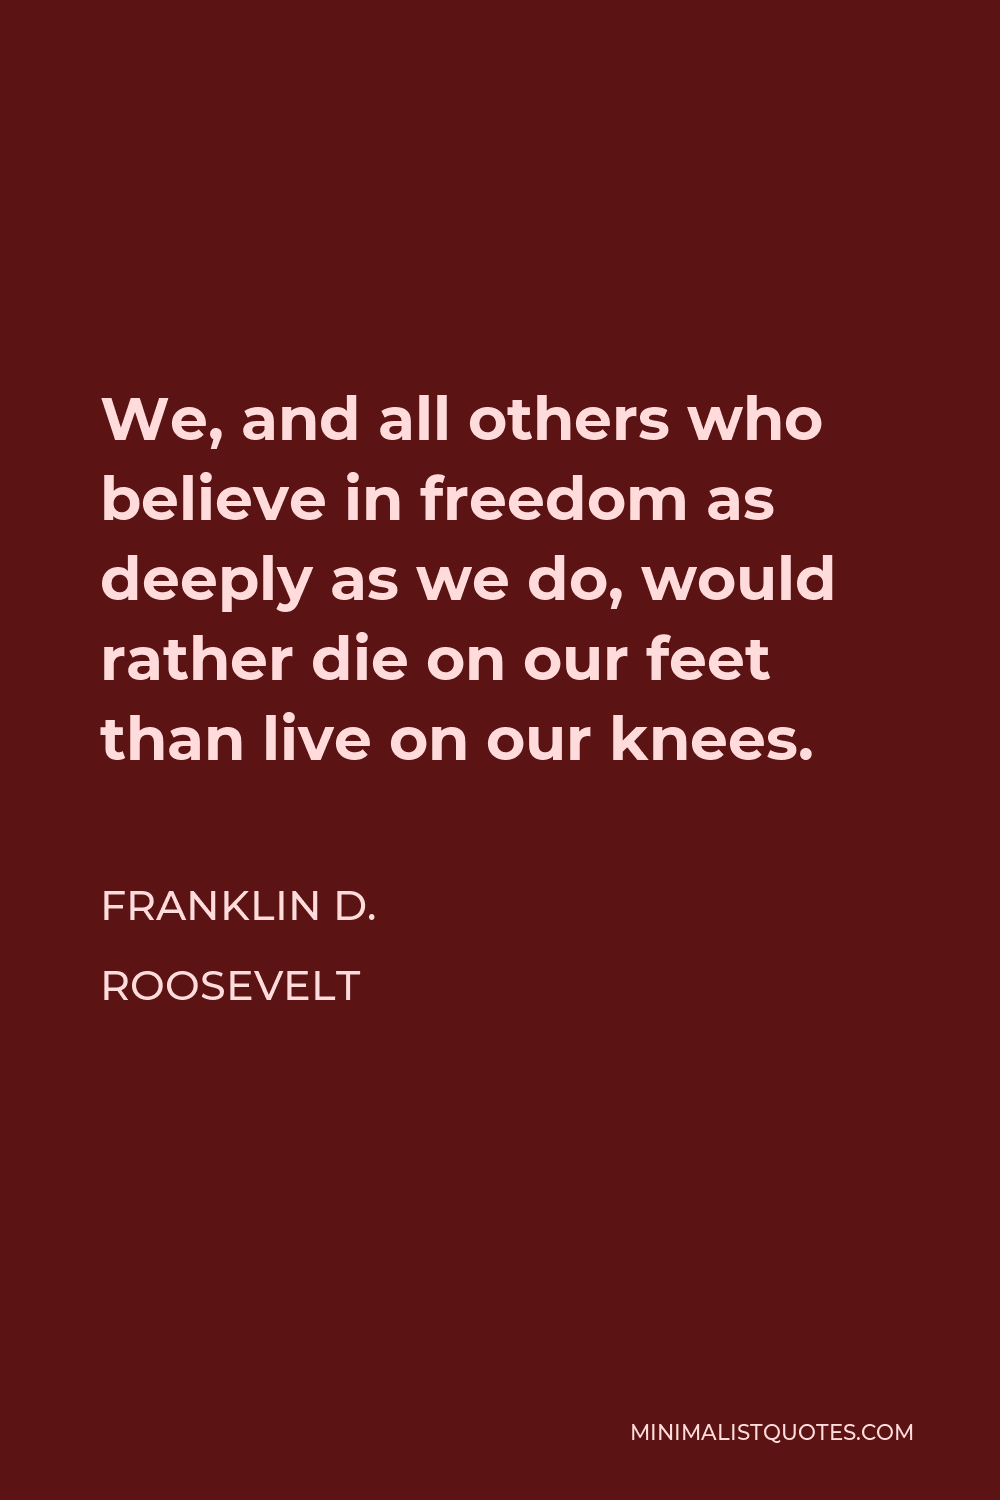 Franklin D. Roosevelt Quote - We, and all others who believe in freedom as deeply as we do, would rather die on our feet than live on our knees.